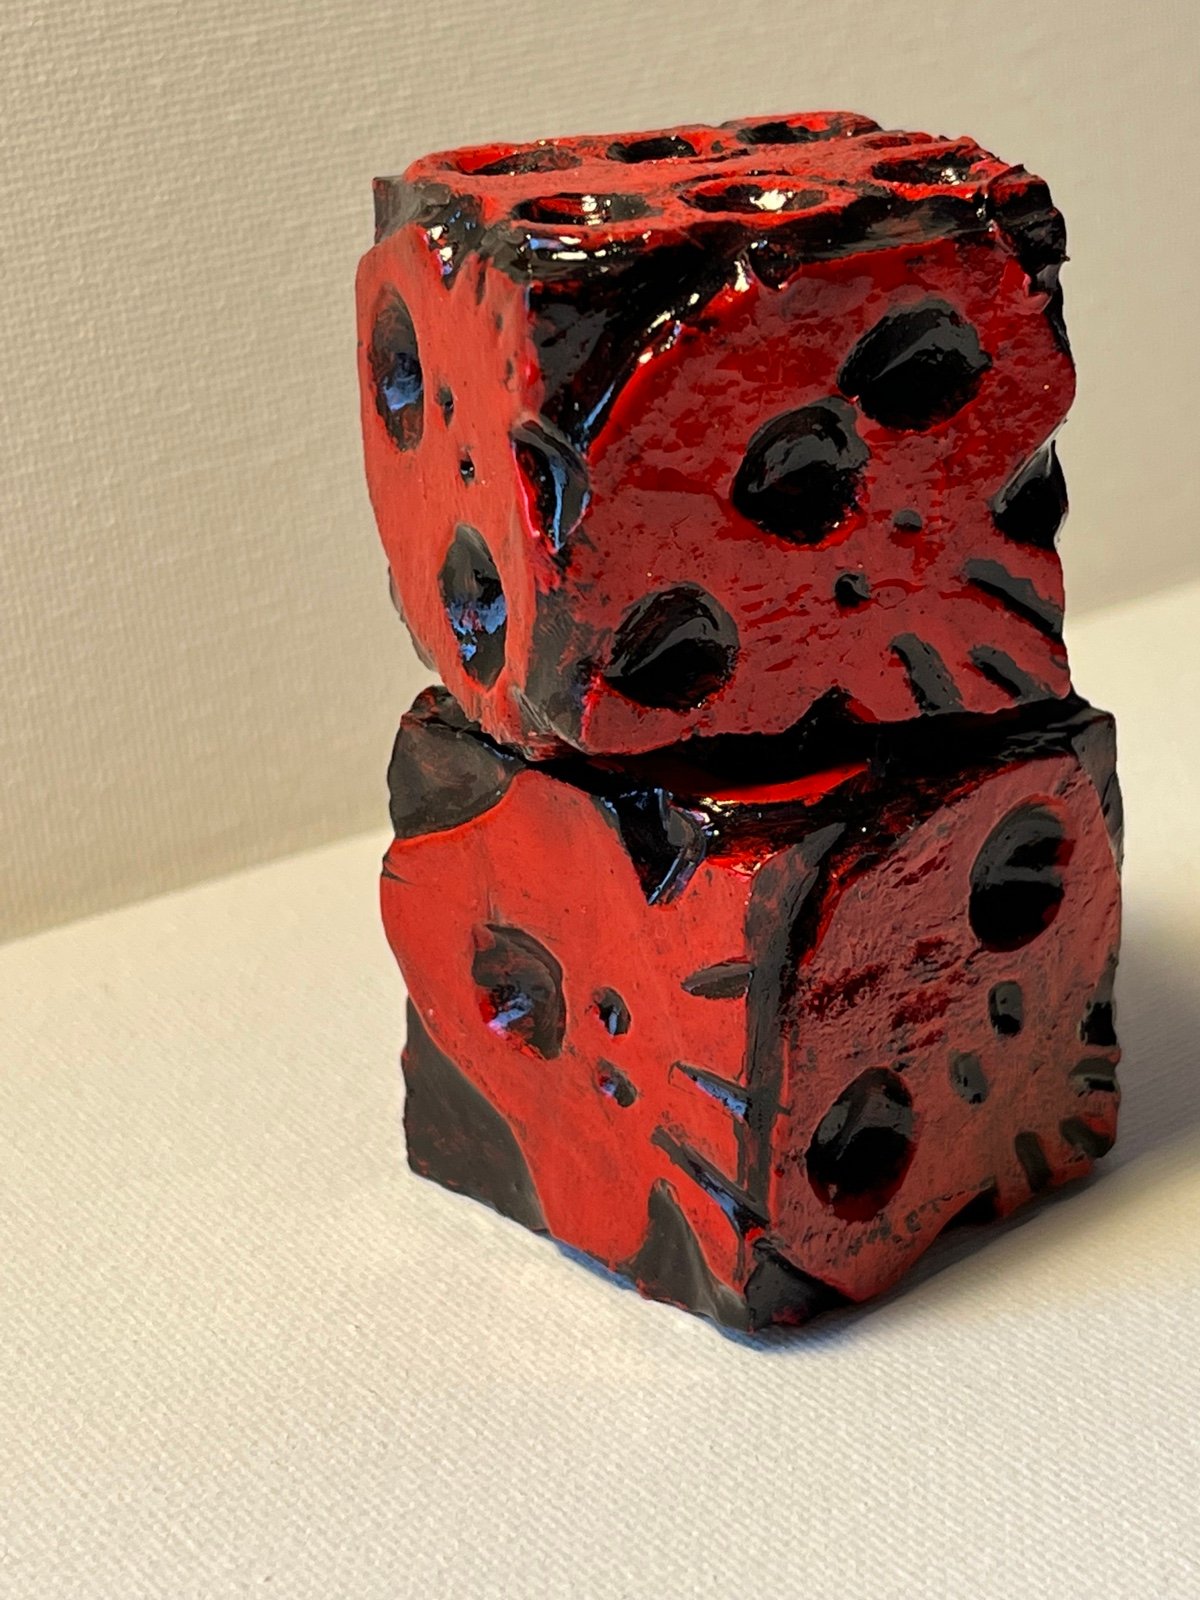 Handcrafted wooden dice, modeled after Oogie Boogie’s dice from NBCXmas hjYQVKvU3